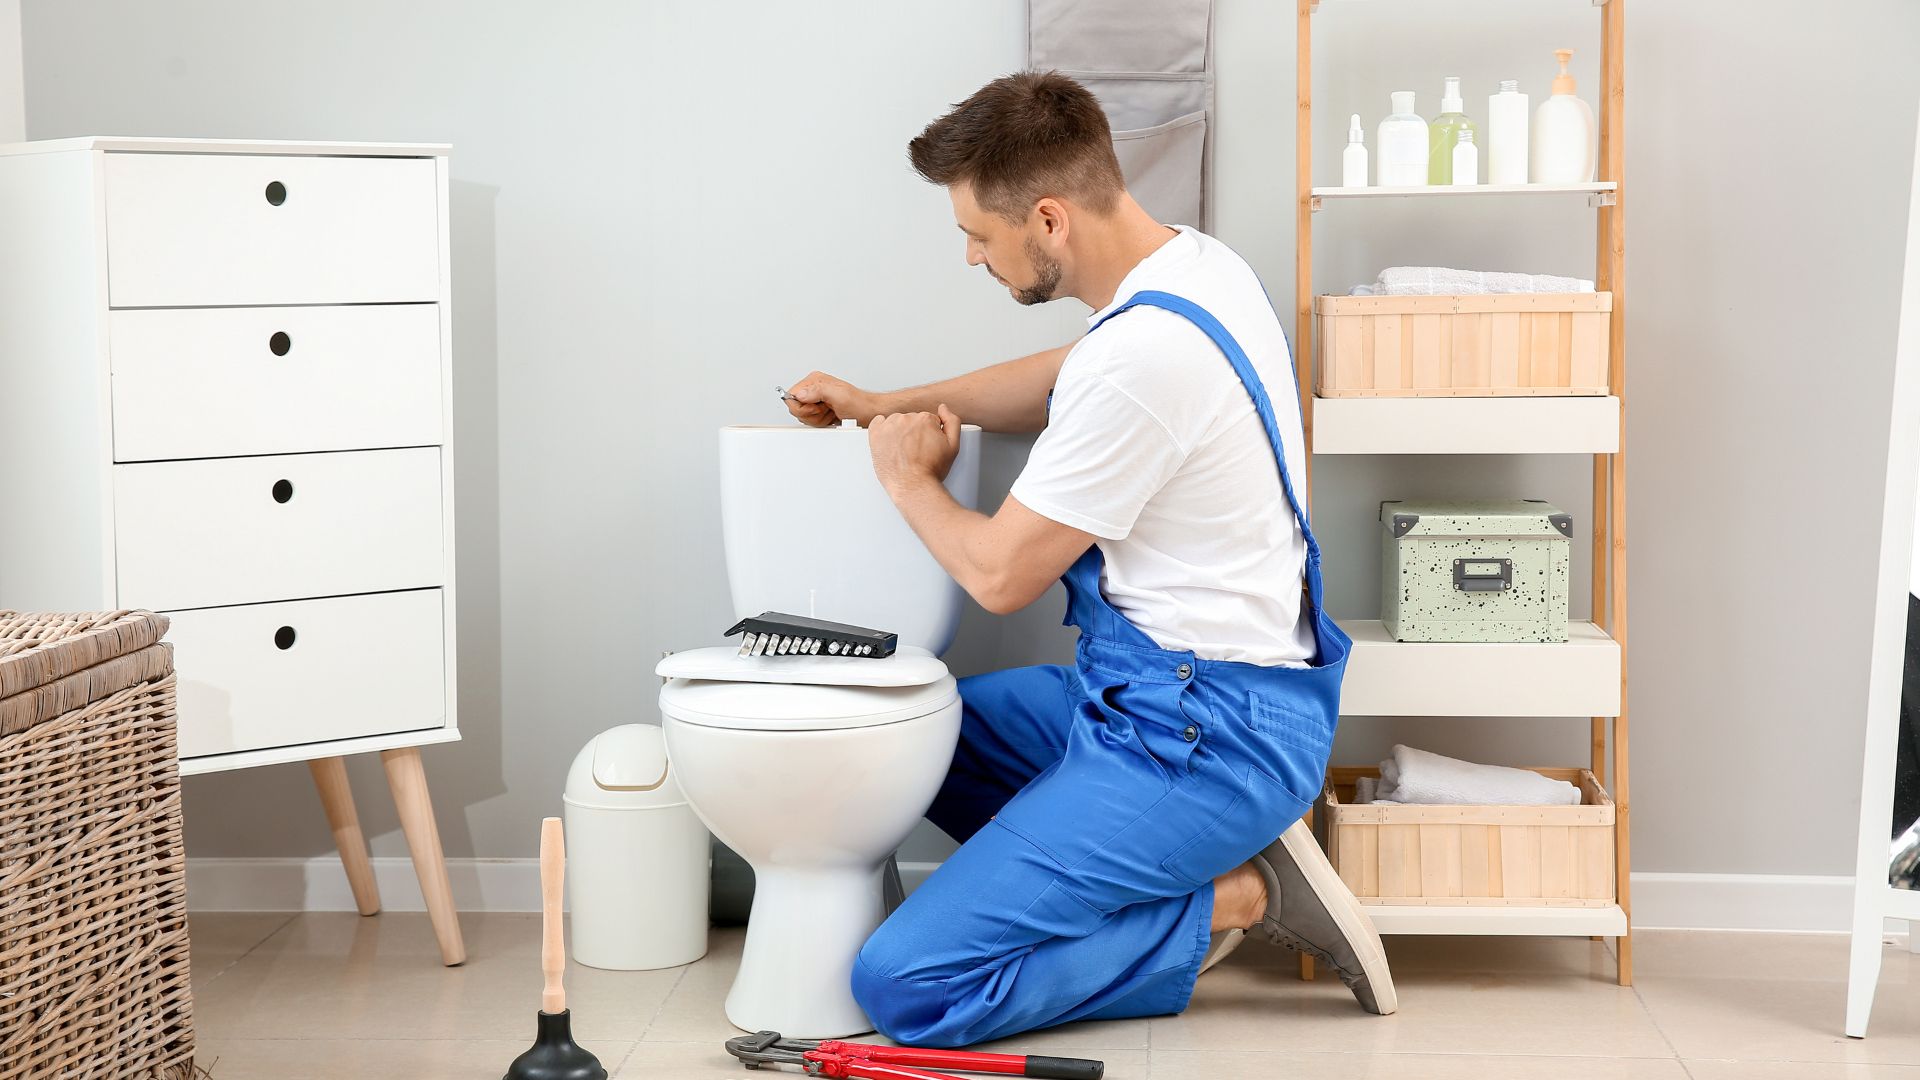 Toilet Installation Plumbing Services in Mississauga by CAN Plumbing & Drainage, Accompanied by Expert Plumbers.